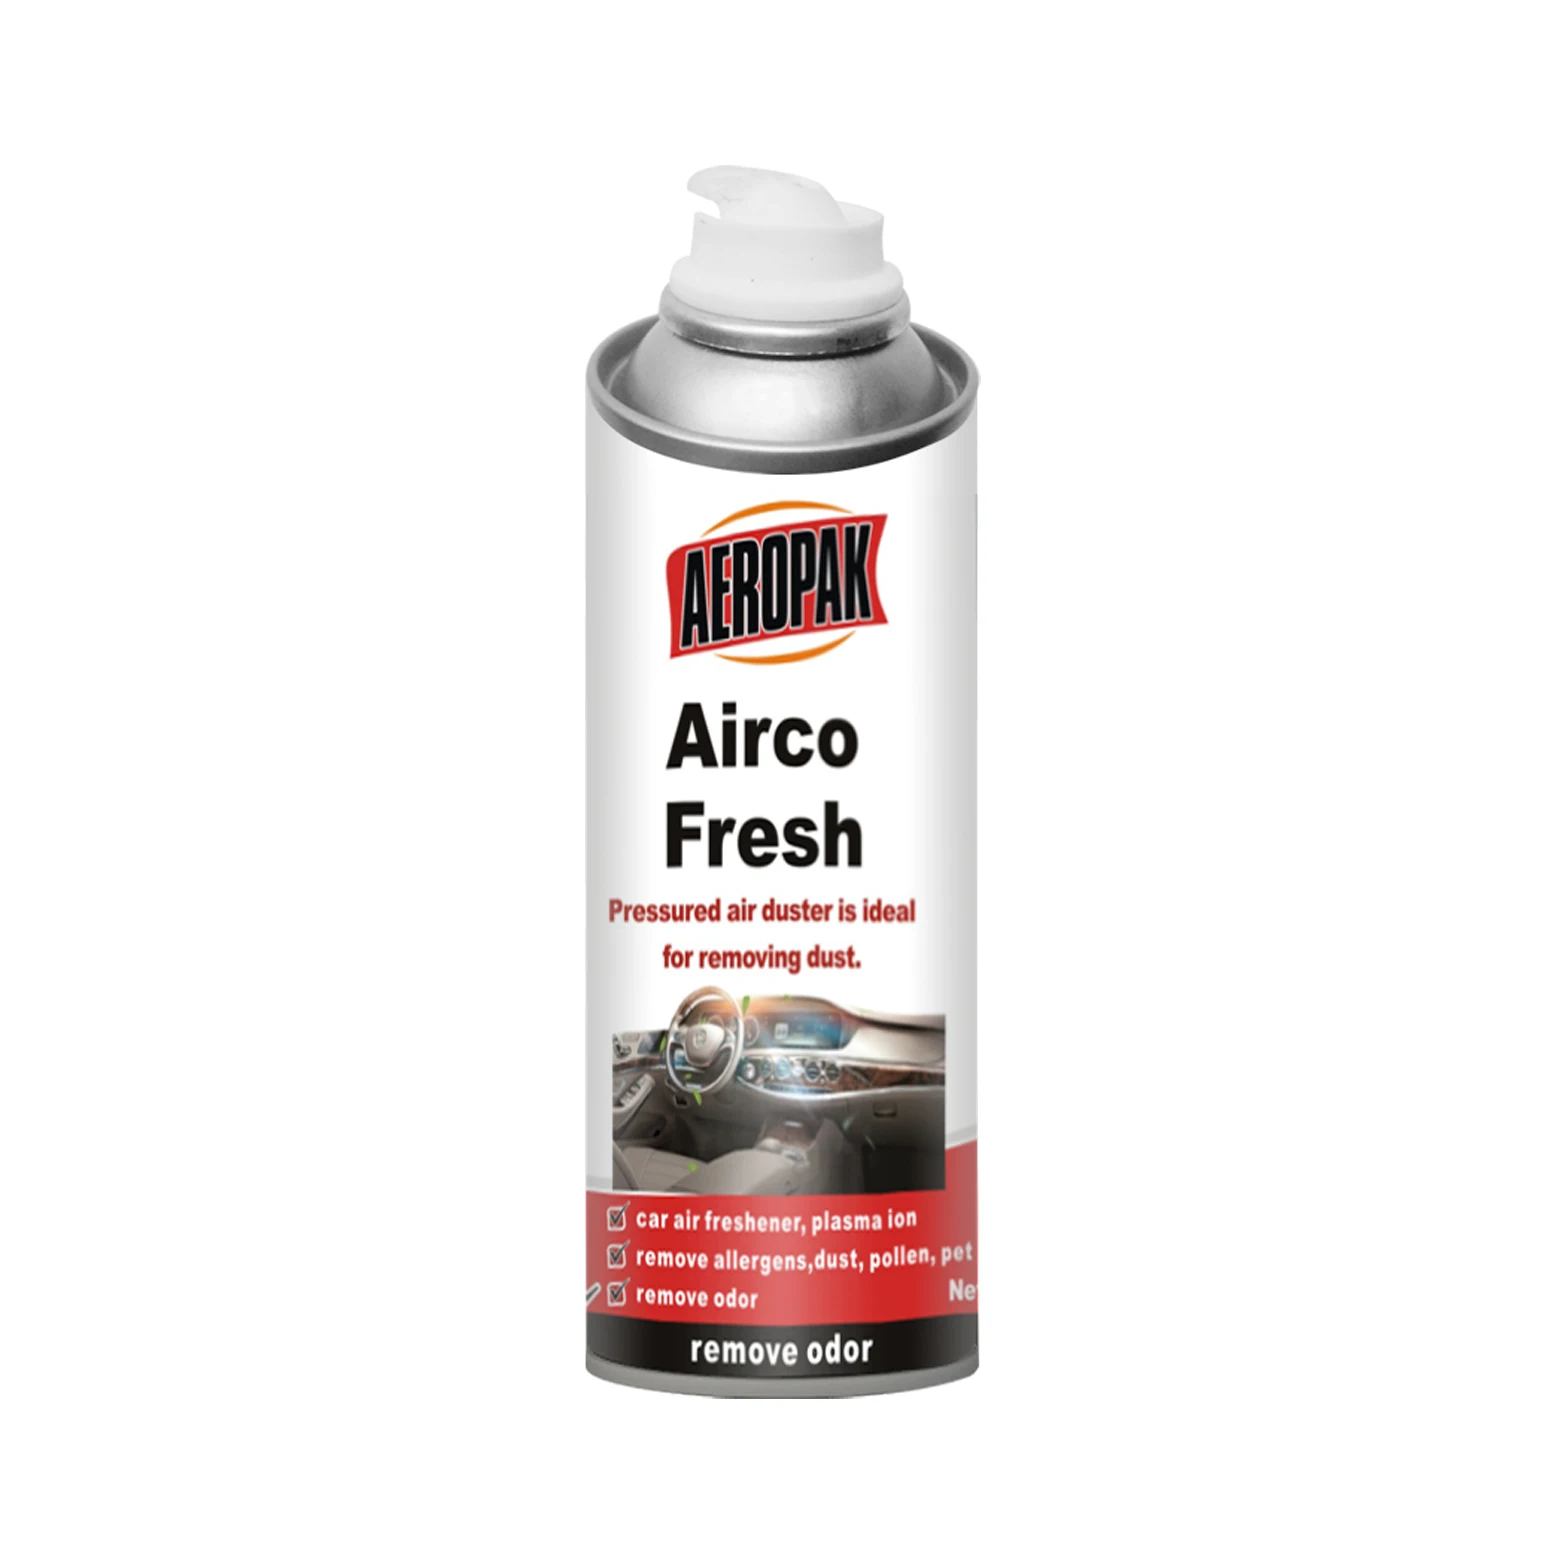 AEROPAK Airco Fresh 200ml with REACH certificate for remove pollen and pet dander